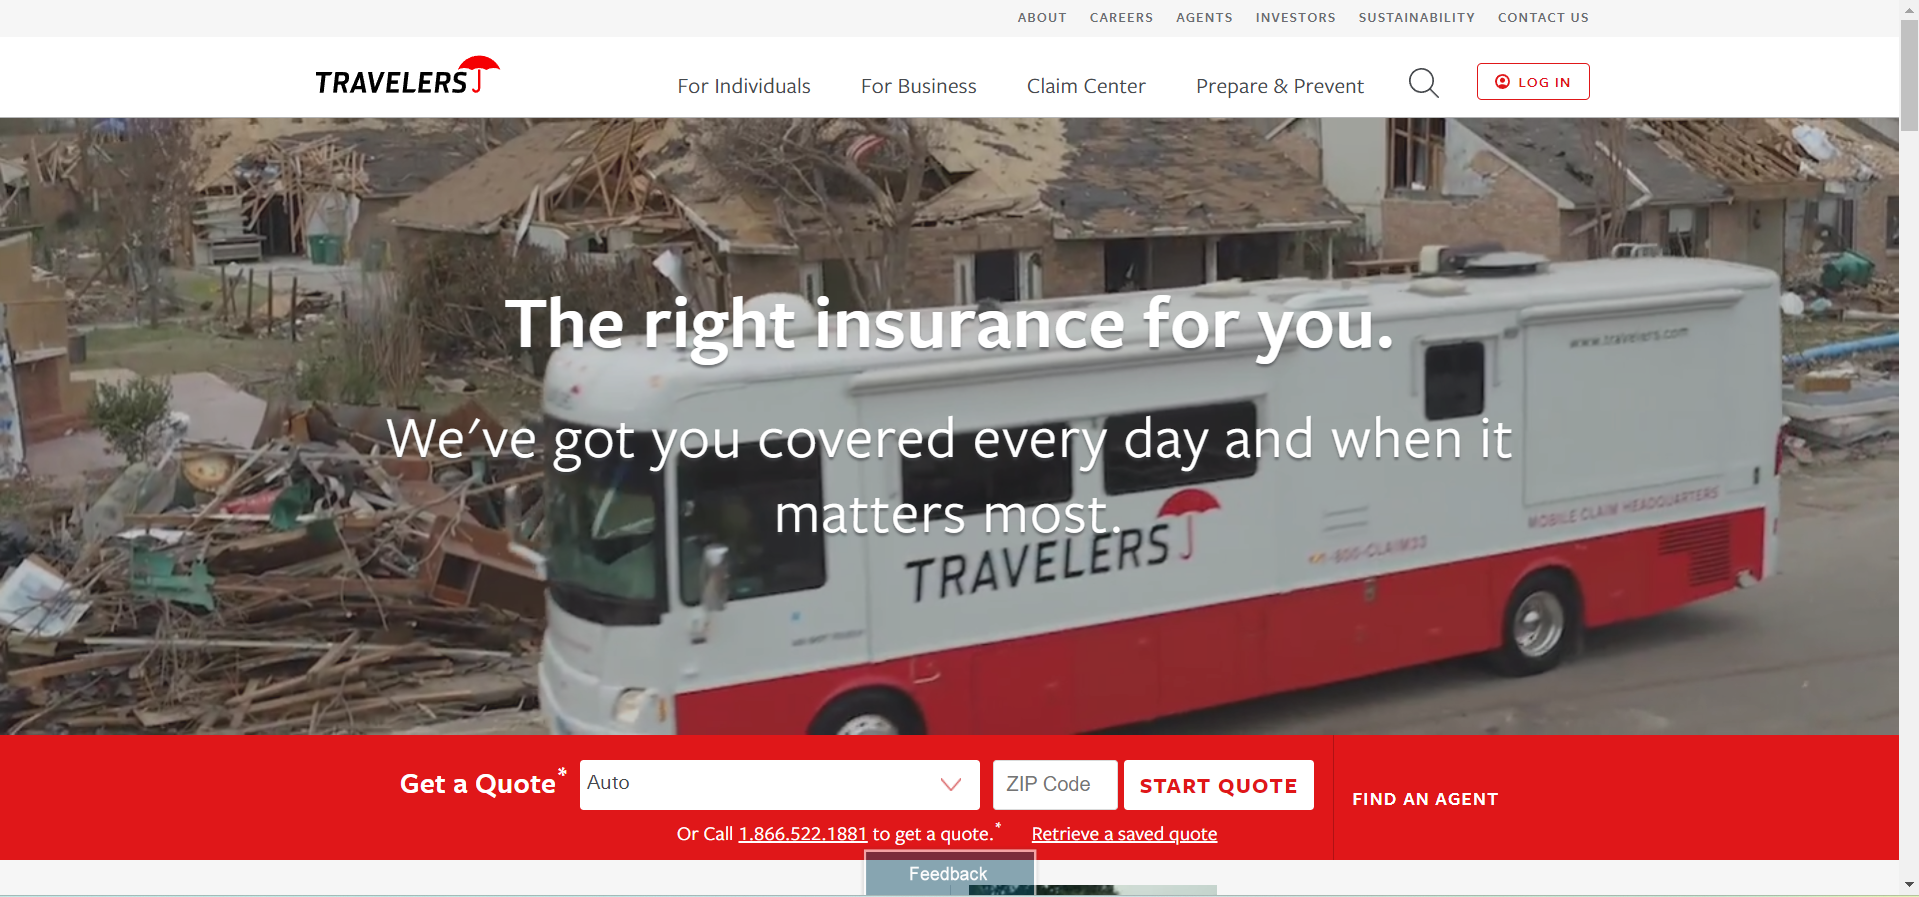 Travelers: Best Business Insurance for Printing Services